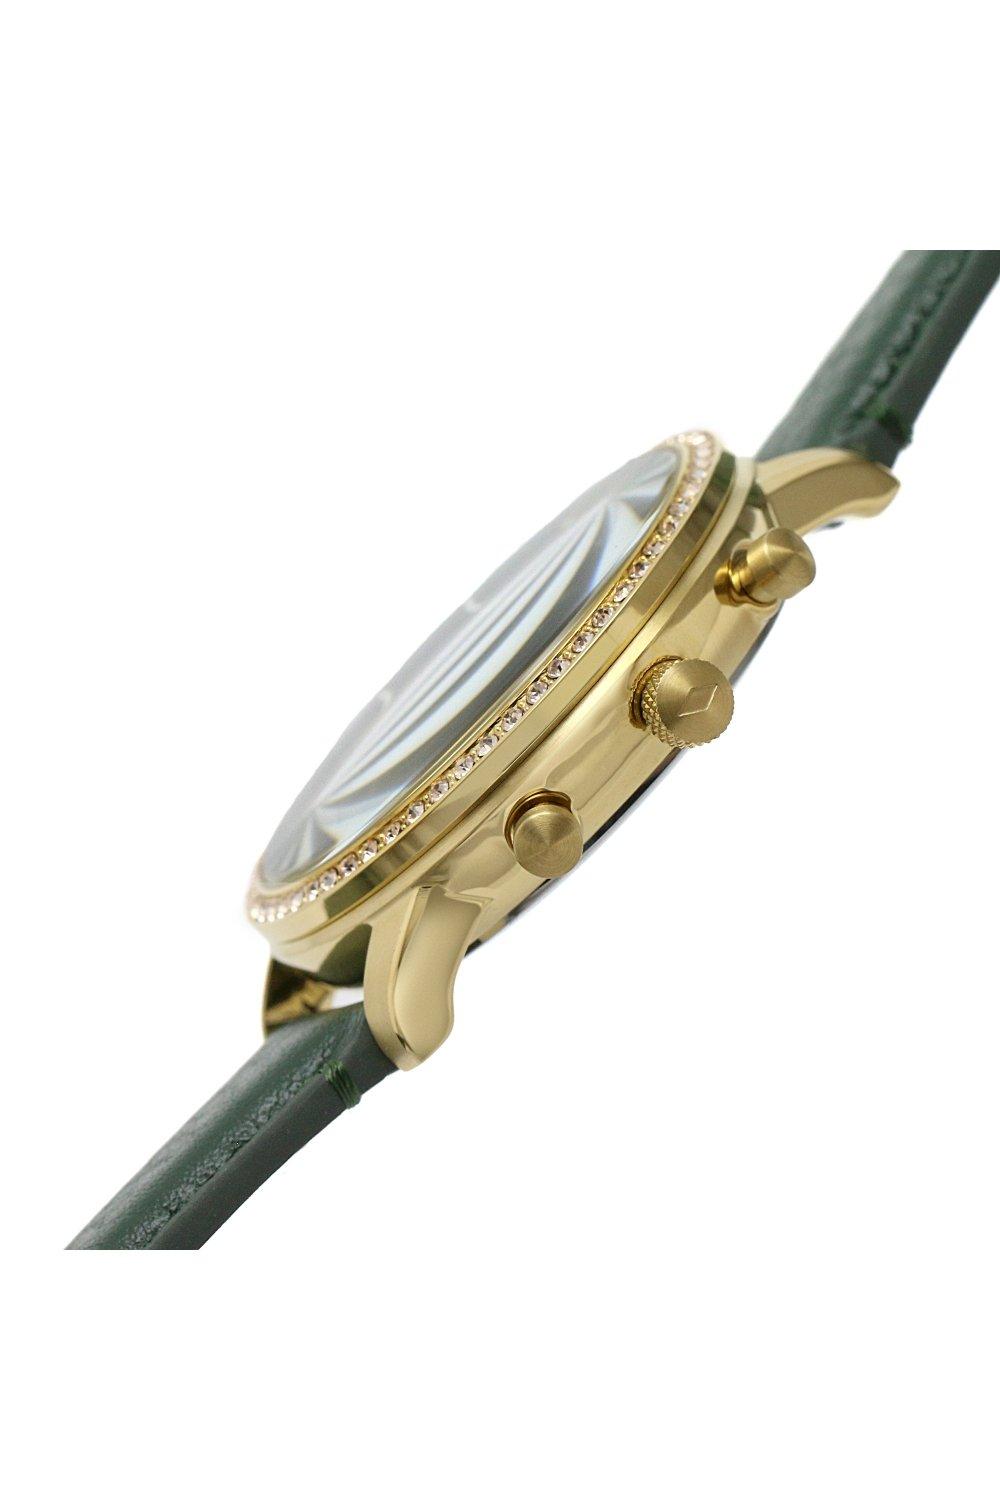 Watches | Neutra Gold Plated Stainless Steel Fashion Analogue